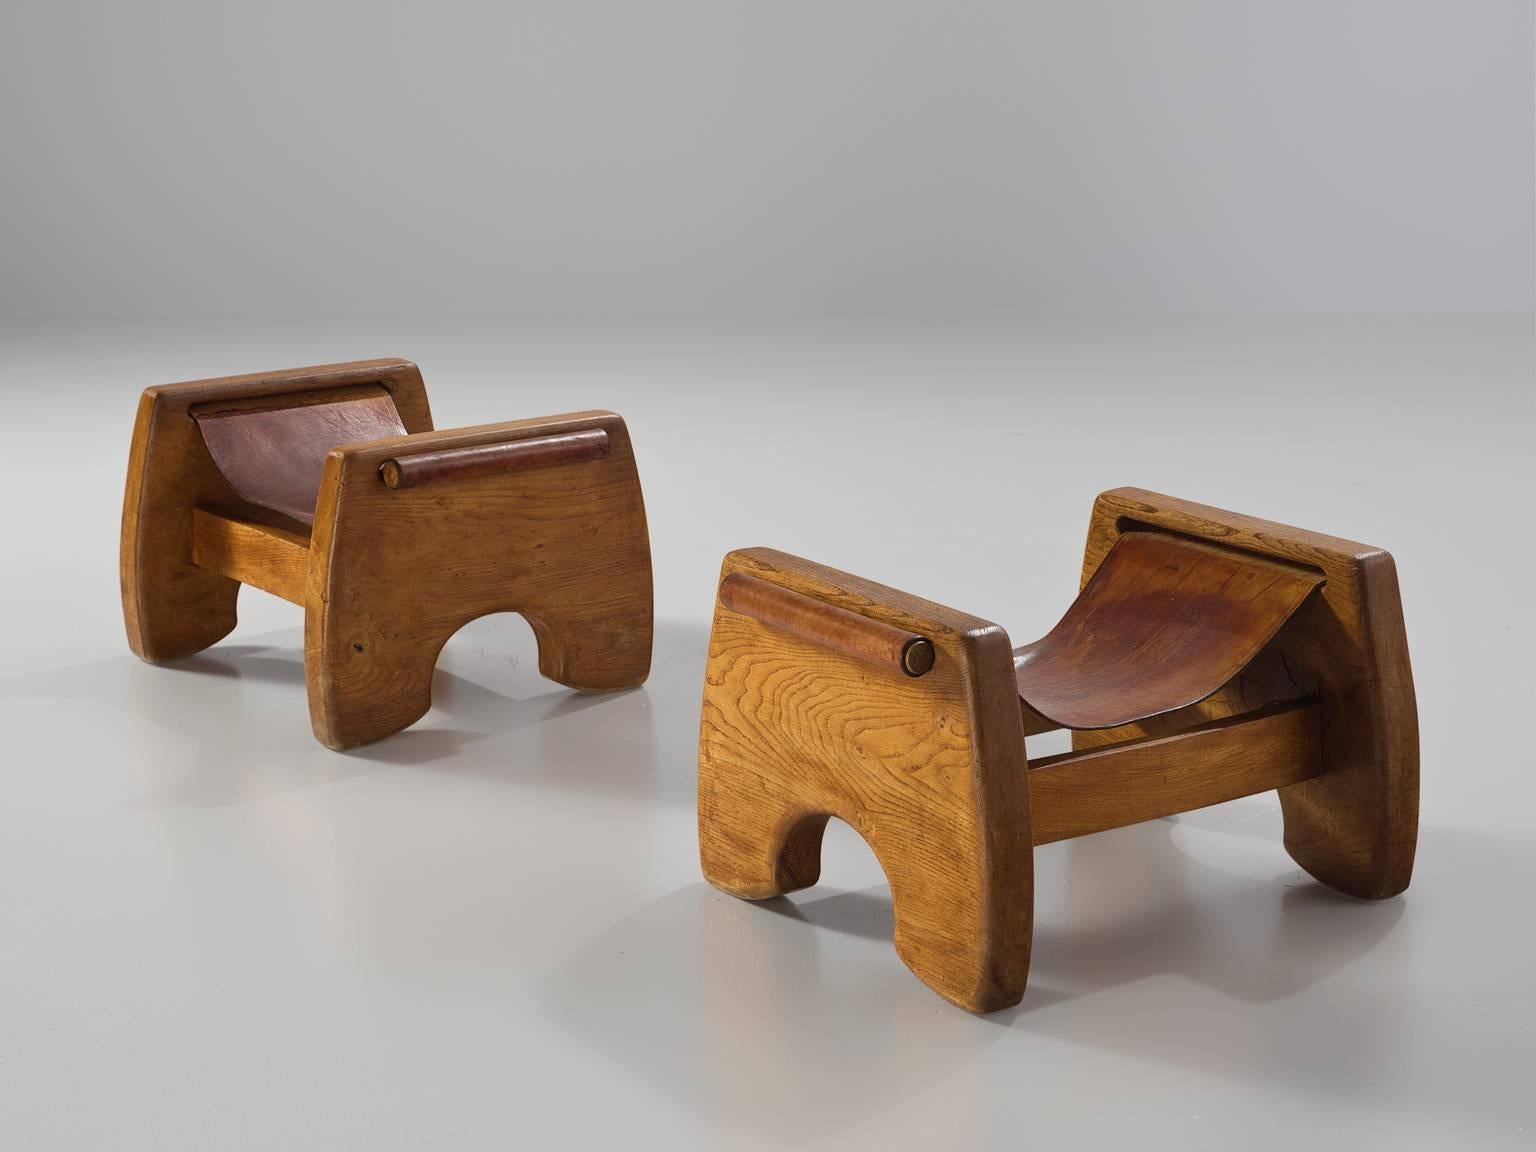 Stools, oak and cognac leather, France, 1940s

This robust and rustic set of stools draws its strength from both the strong design and the use of natural, sturdy materials. The sculptural, dense ook frame consists of two U-shaped sides and